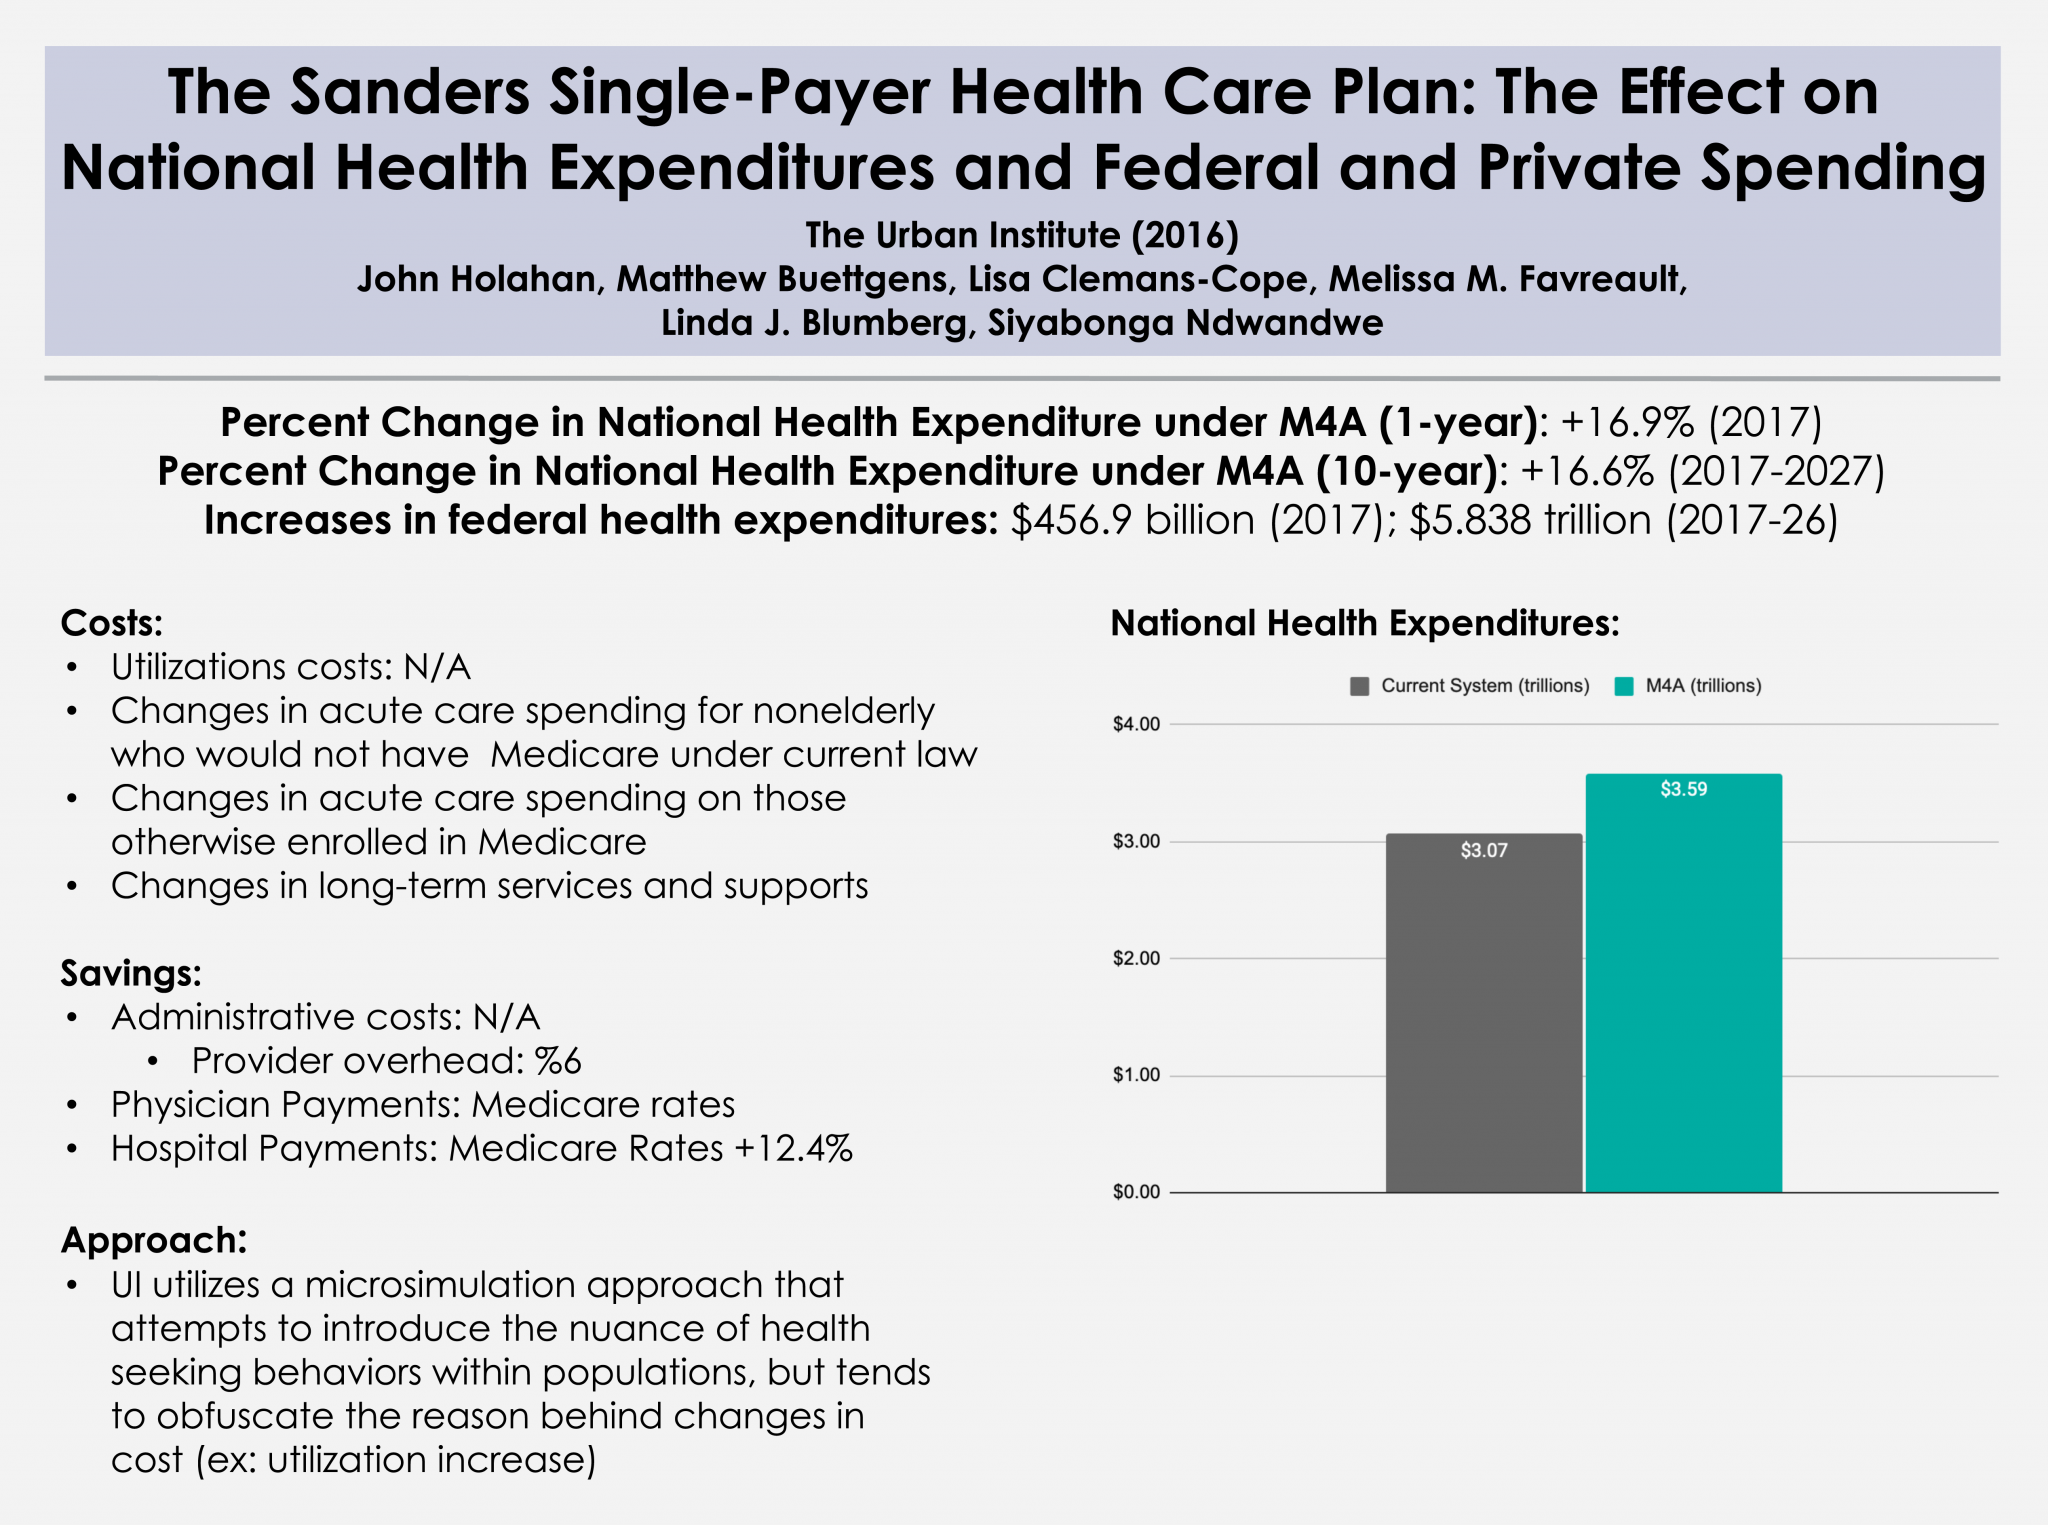 “The Sanders SinglePayer Health Care Plan The Effect on National